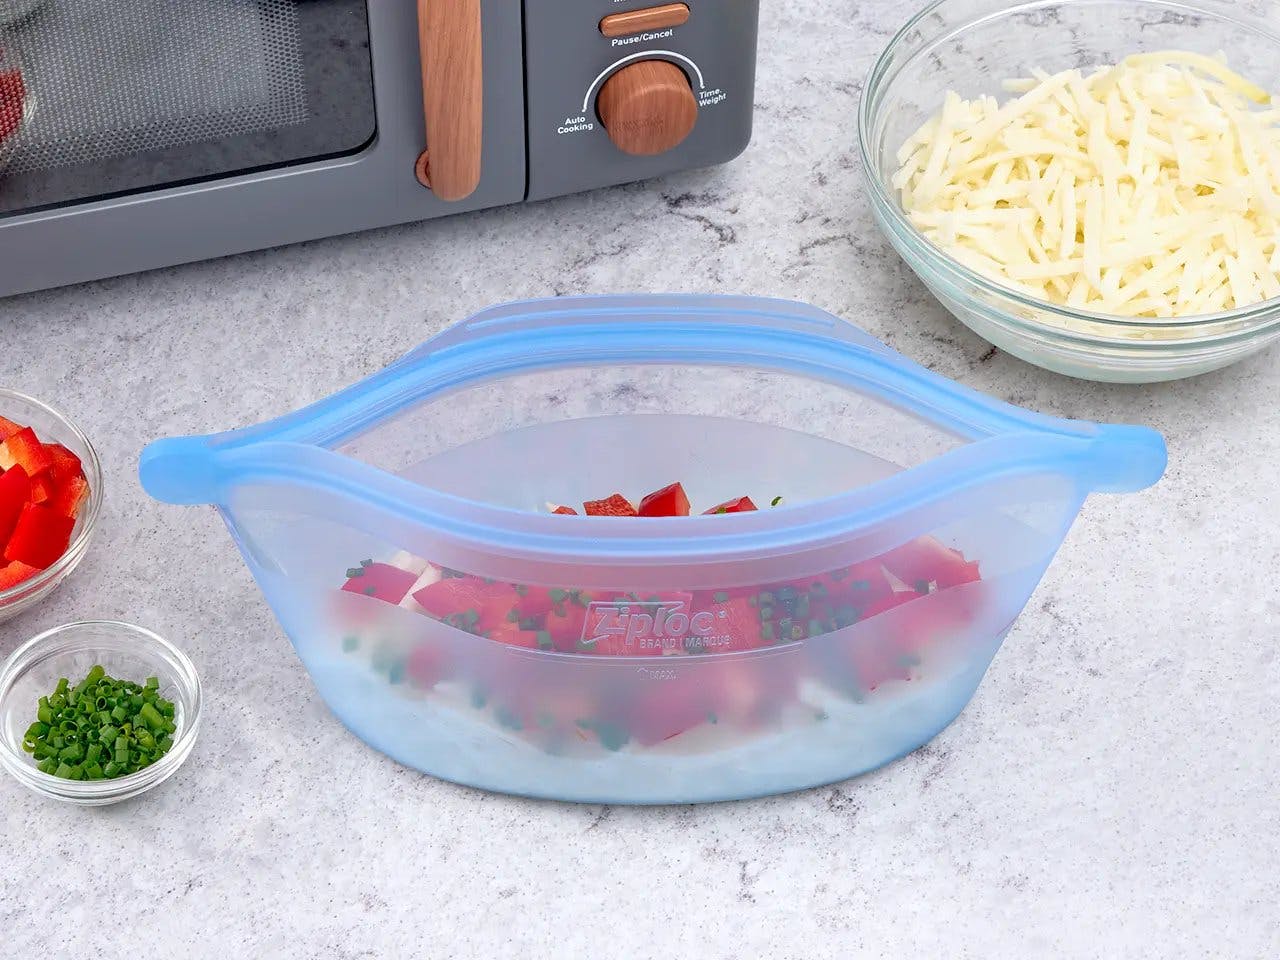 Ziploc Endurables container with potatoes, red pepper, and chives.